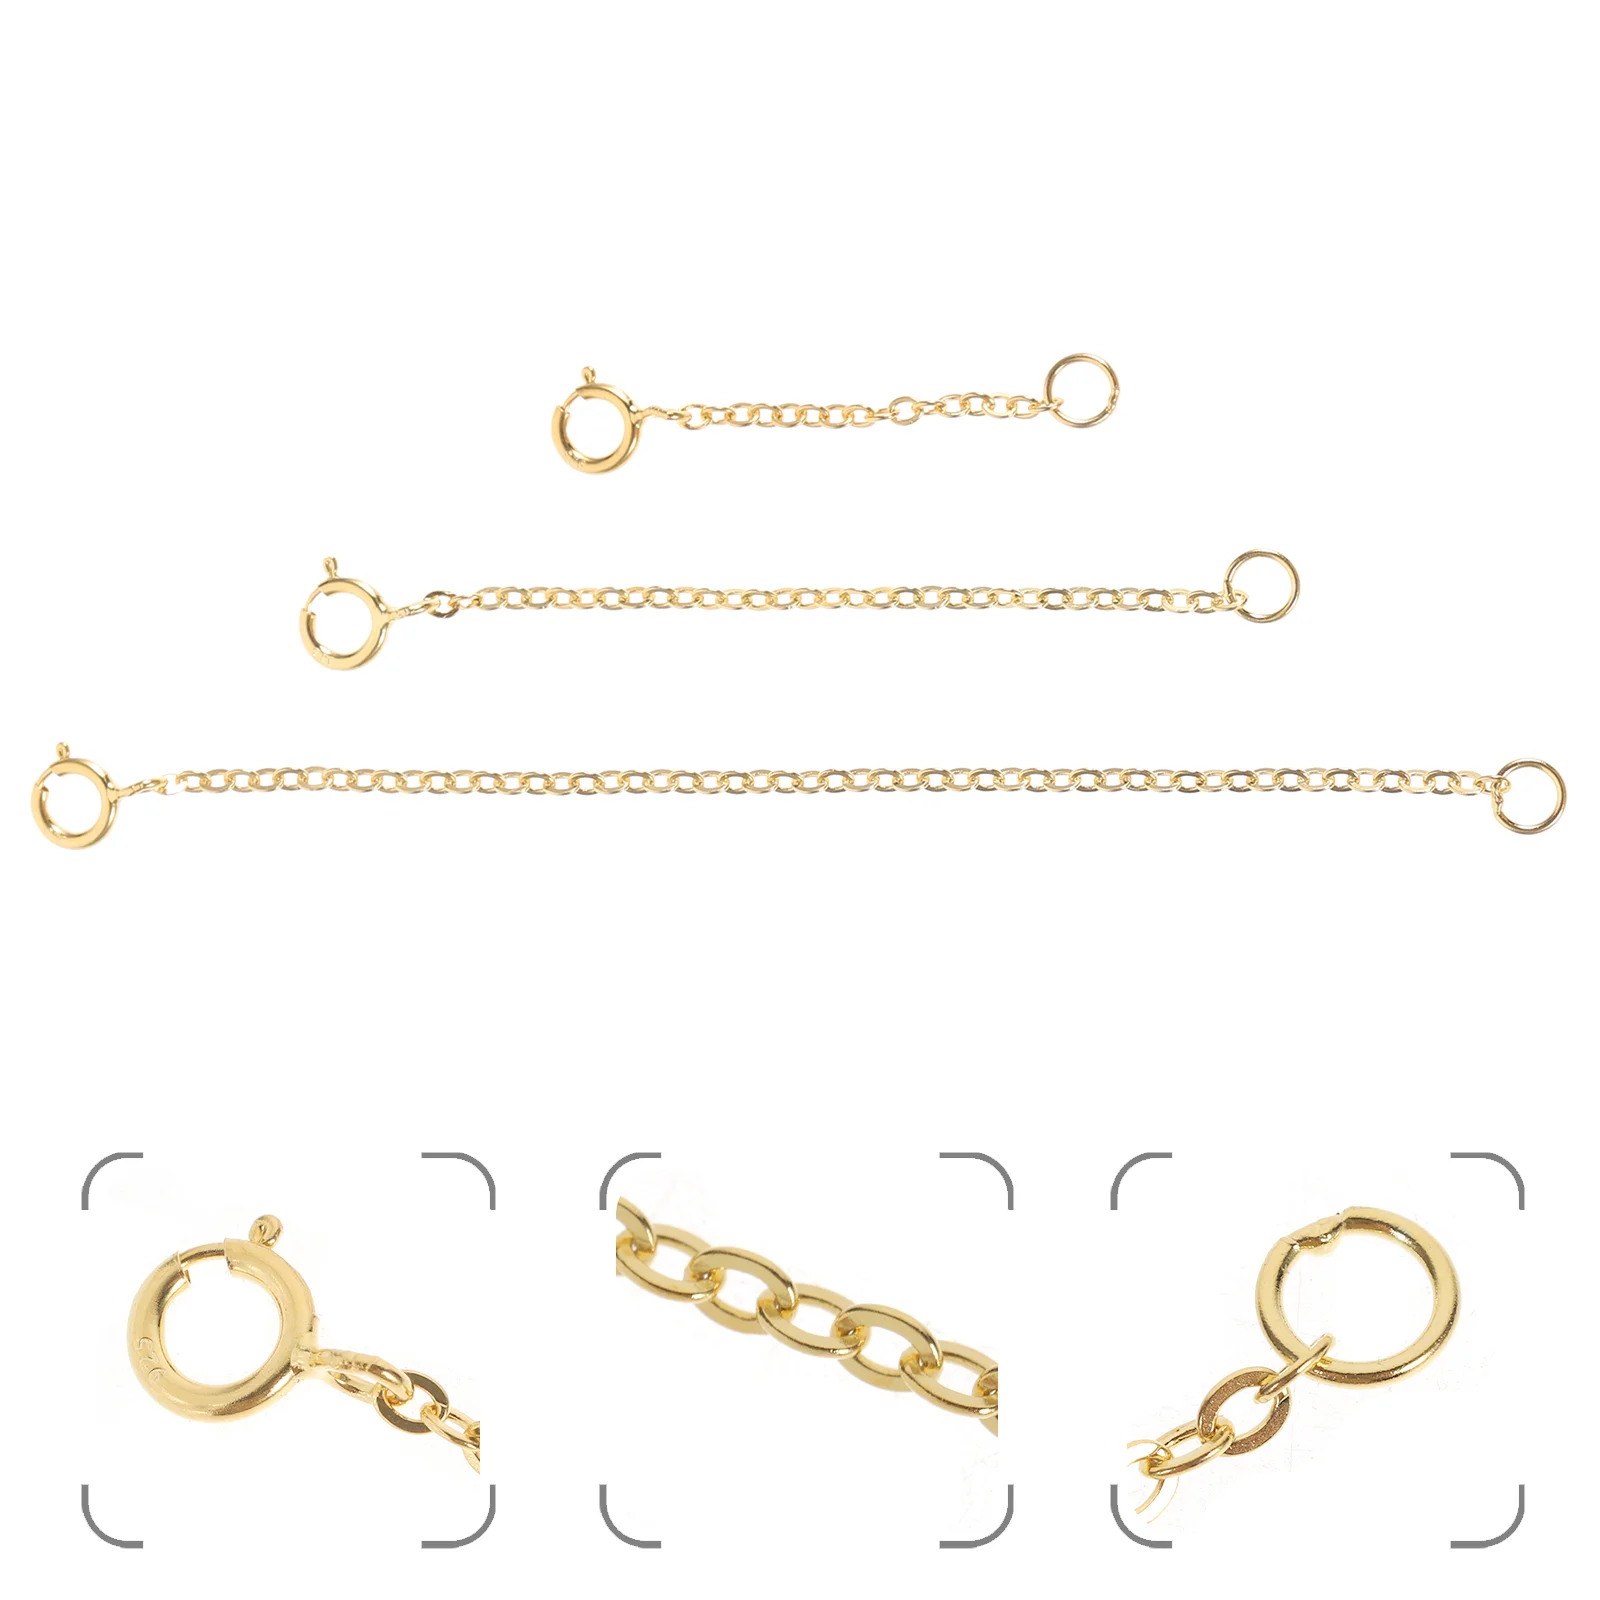 

3pcs S925 Sterling Silver Extender Chain Adjustive DIY Extended Chains Jewelry Making Accessories for Necklace Bracelet (Golden)